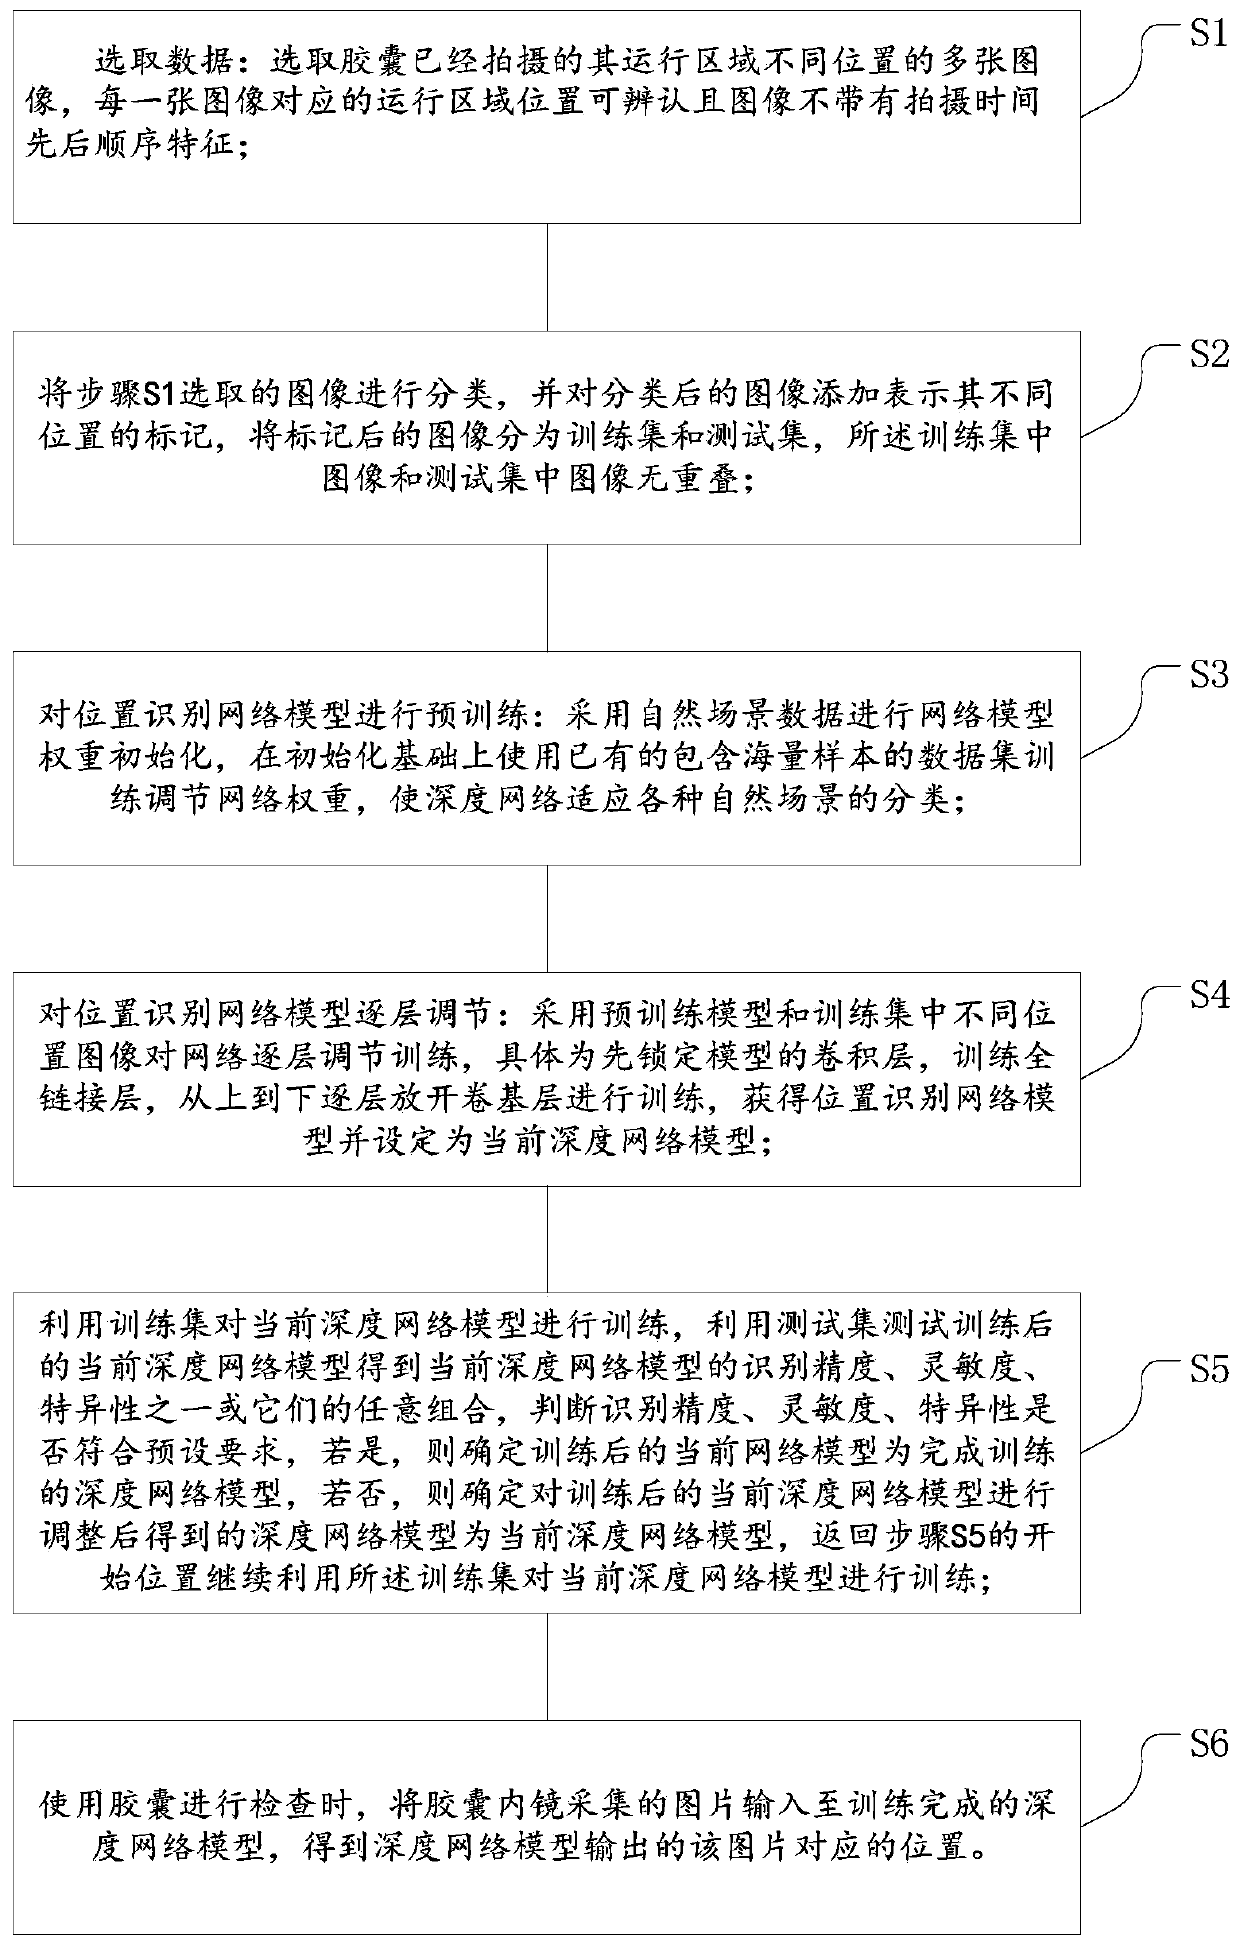 Image recognition method and system